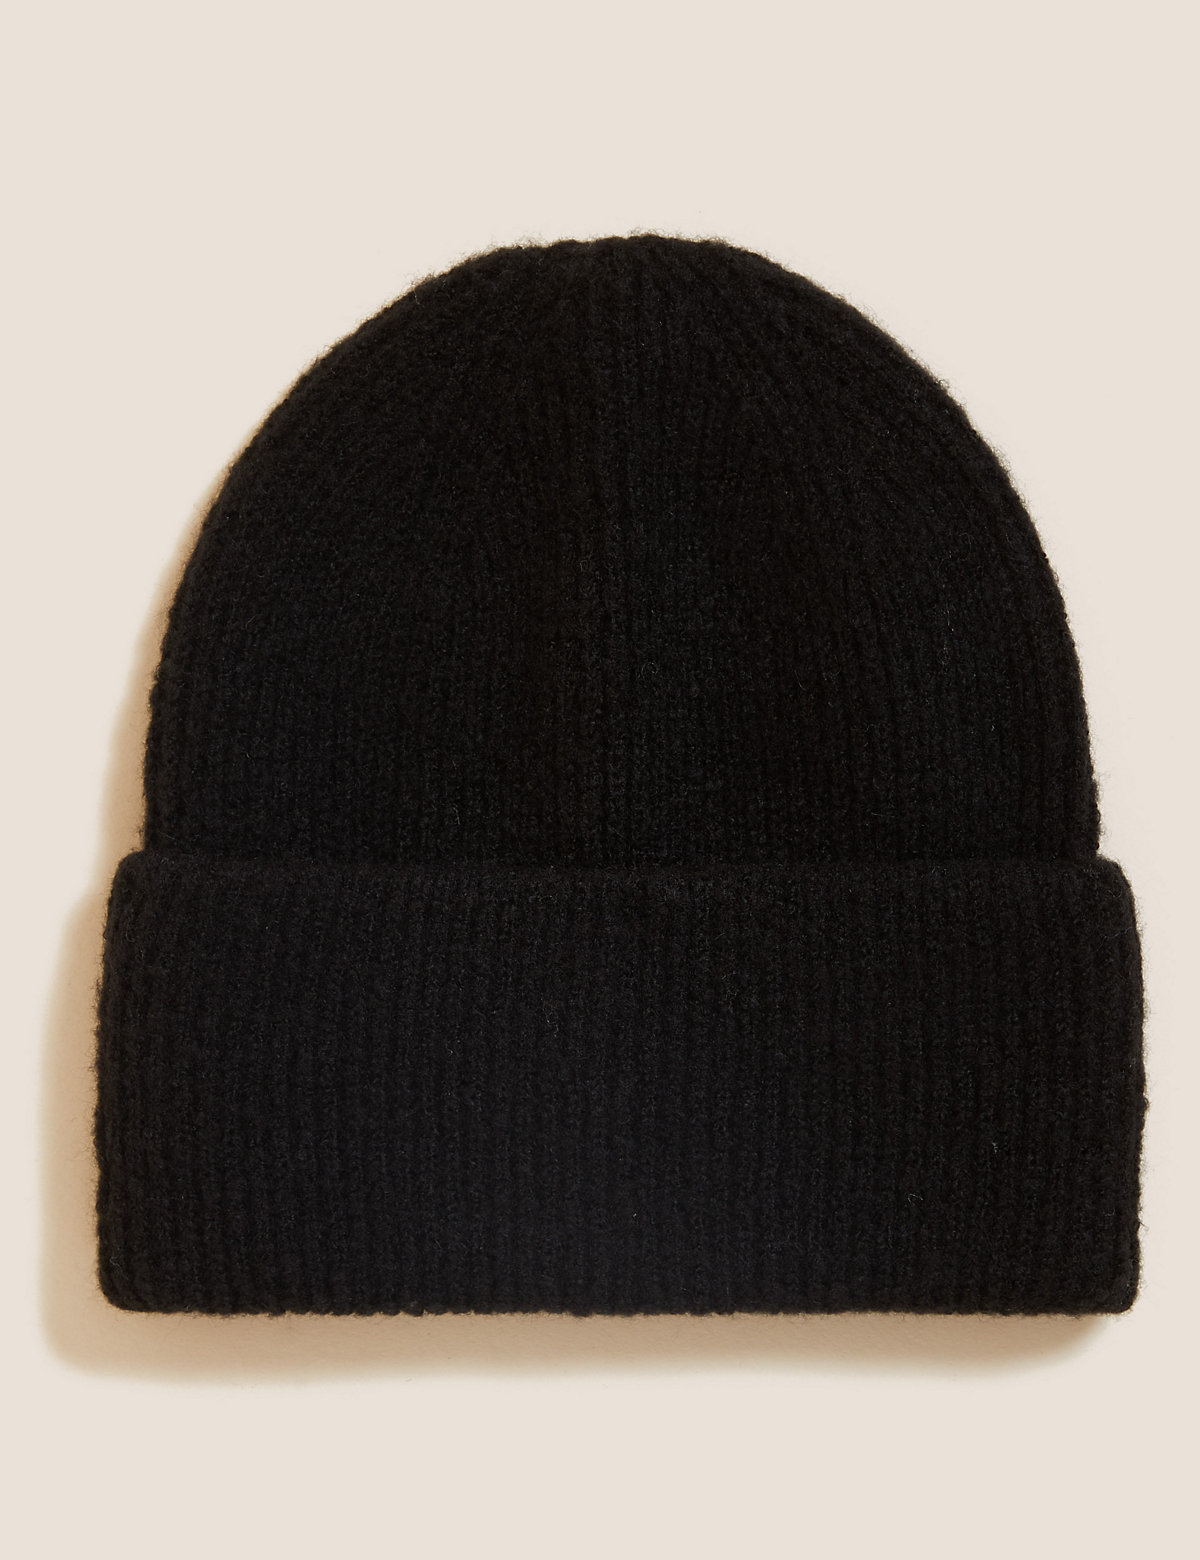 The Knitted Beanie